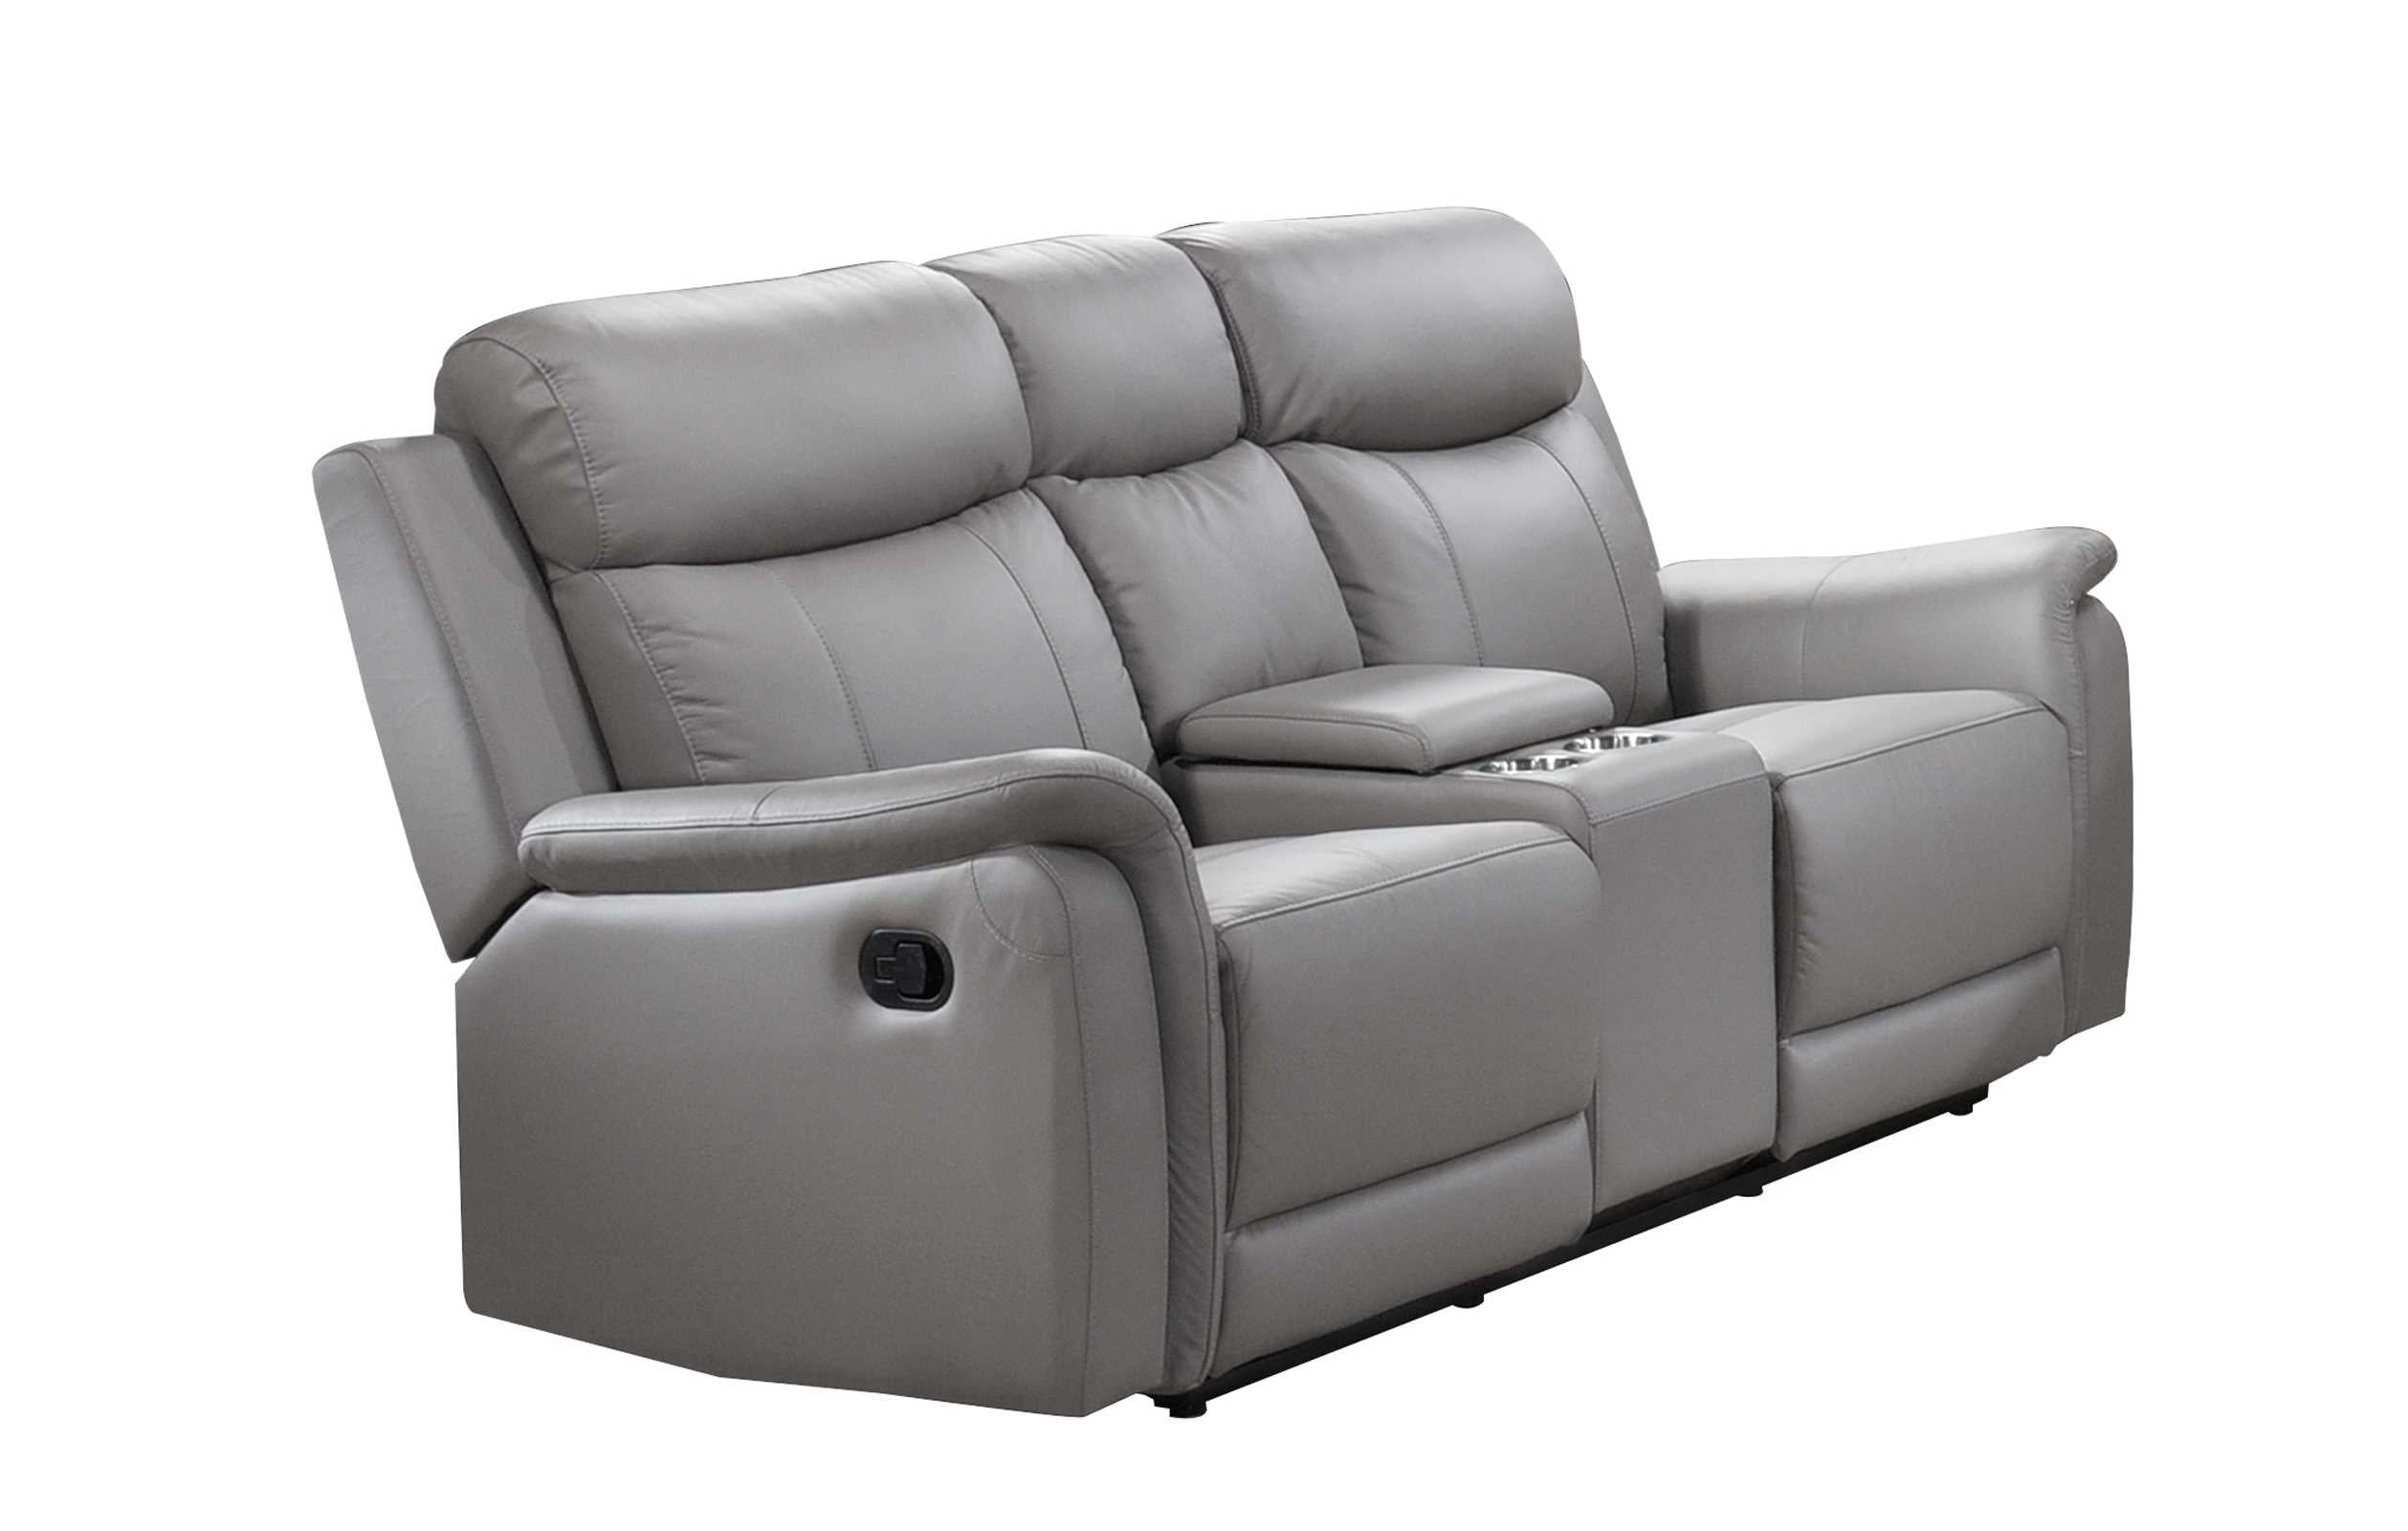 Cyrus Top Grain Leather Reclining Sofa Collection Light Grey 99840